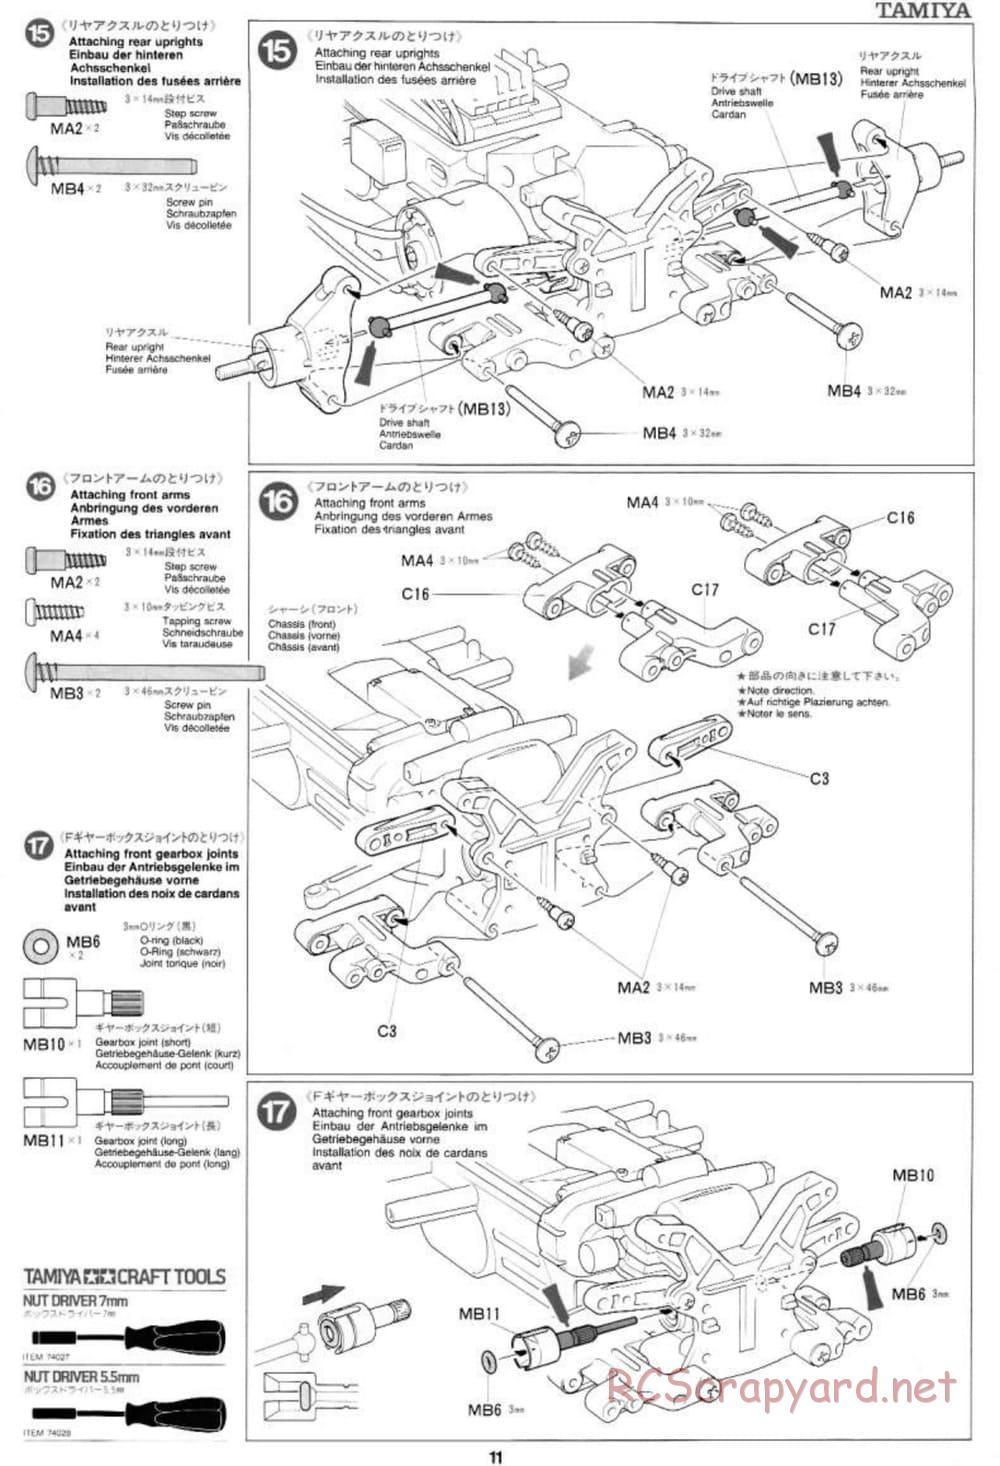 Tamiya - Toyota Celica GT-Four 97 Monte Carlo - TL-01 Chassis - Manual - Page 11